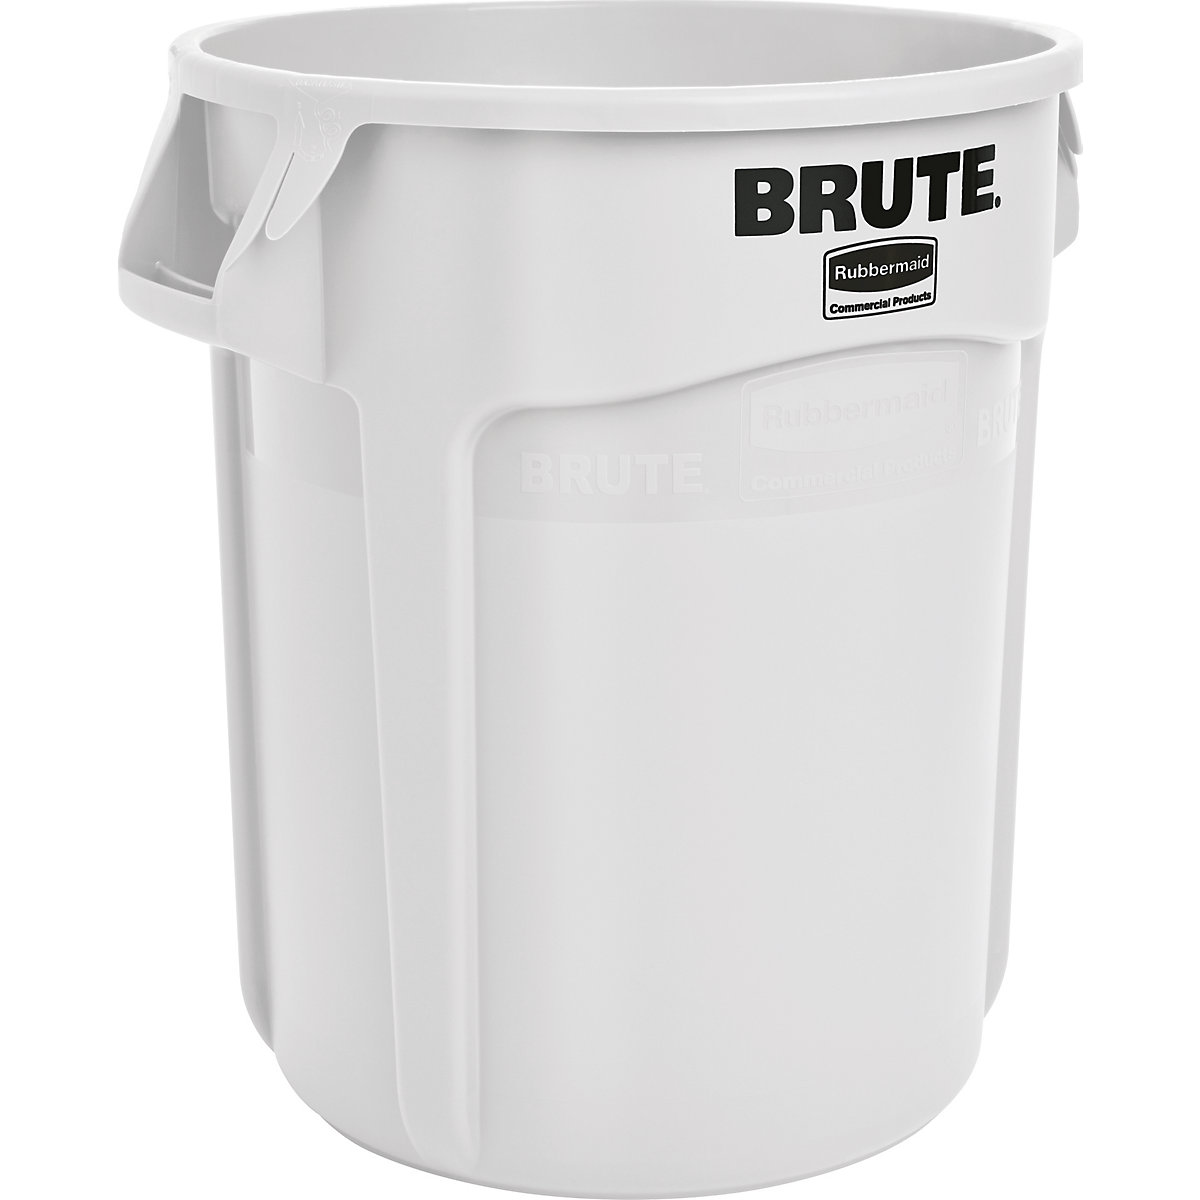 BRUTE® universal container, round – Rubbermaid, capacity 37 l, white